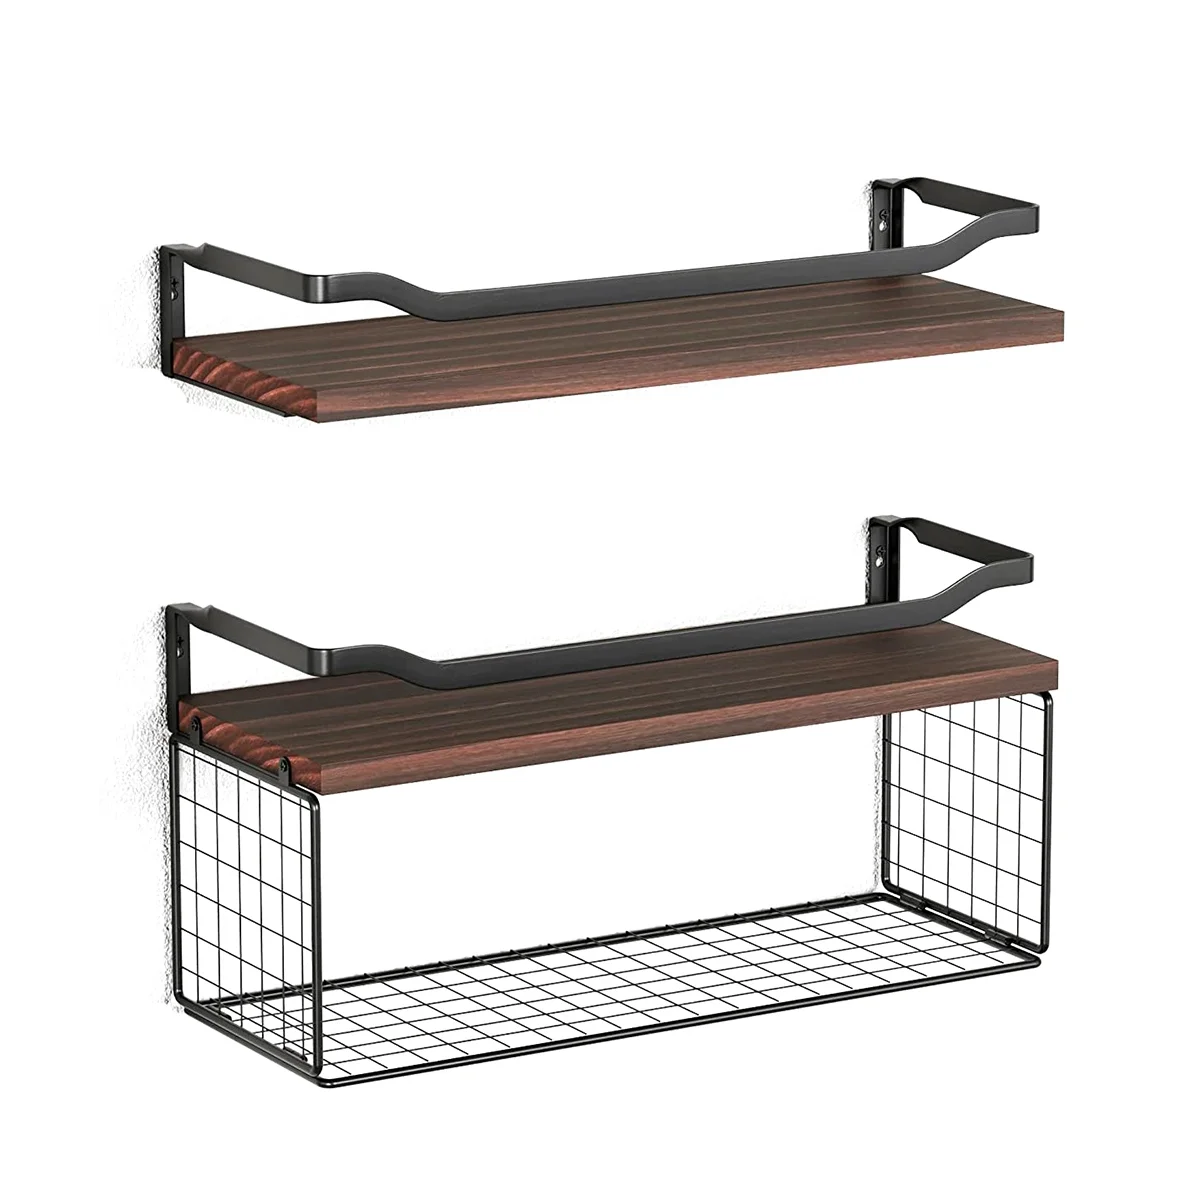 

Floating Shelves with Wire Storage Basket, Bathroom Shelves Over Toilet with Protective Metal Guardrail